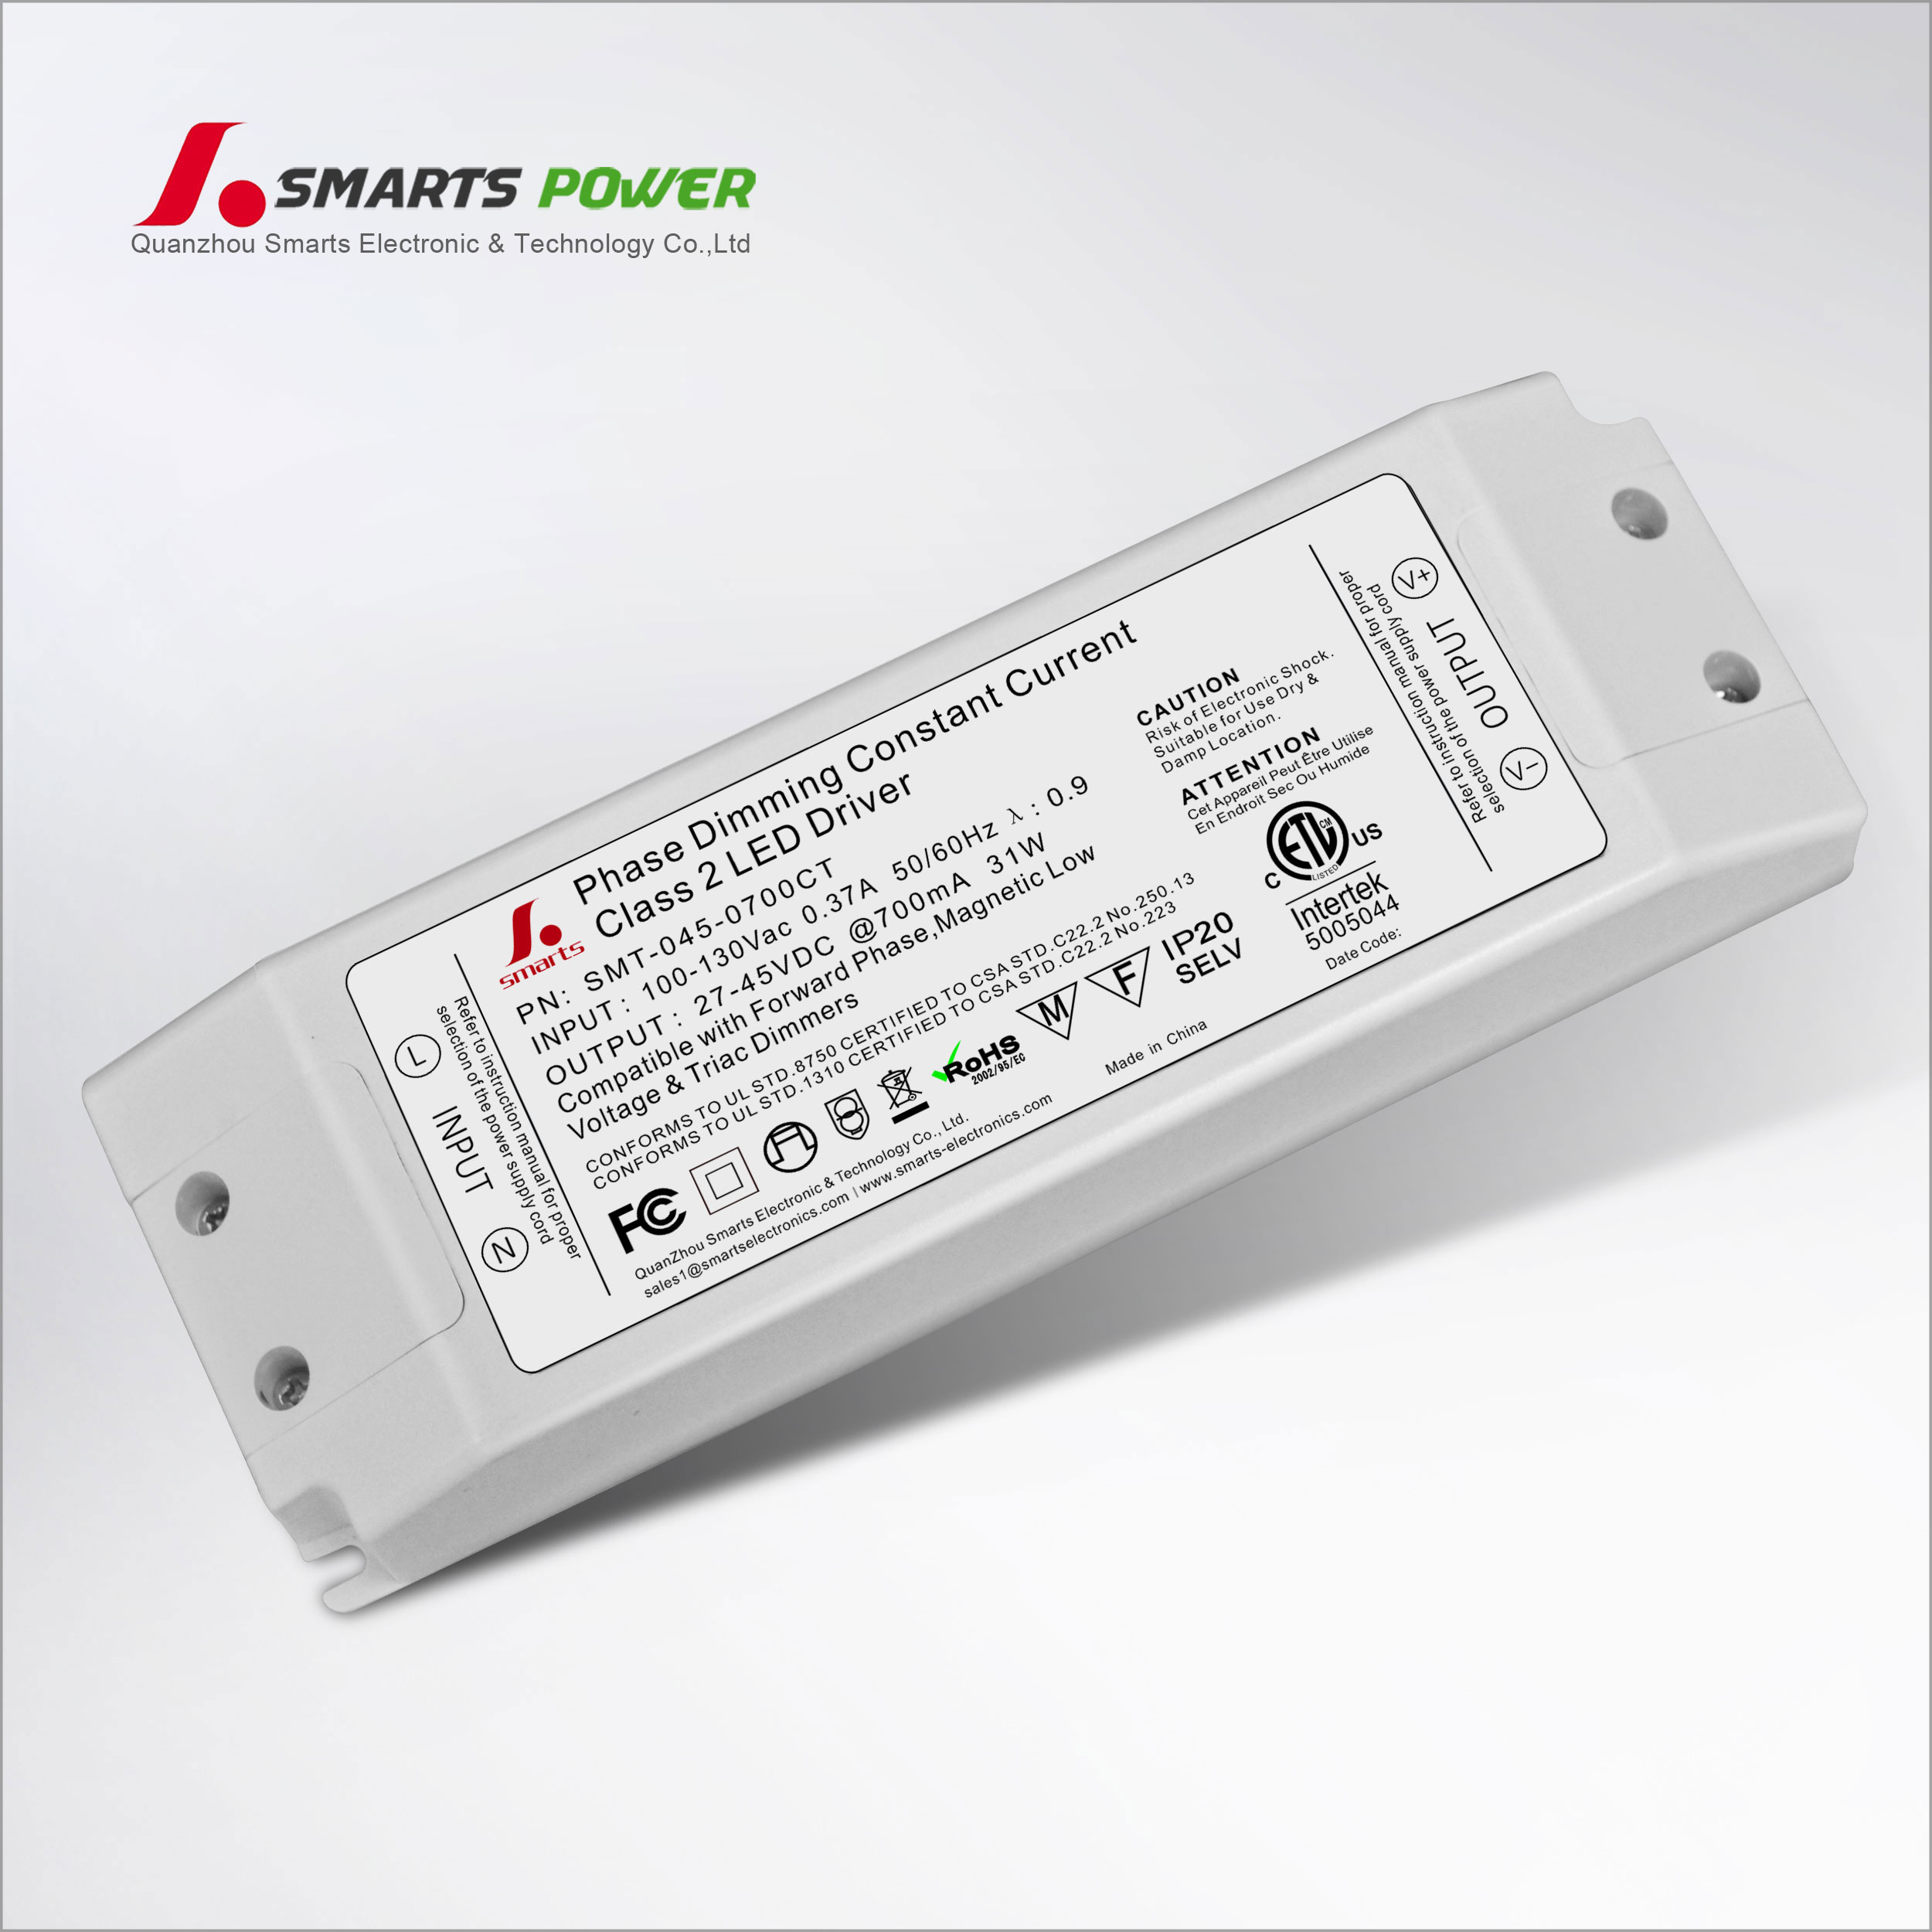 constant current drivers,smarts power supply,smarts led driver,dimmable led driver,